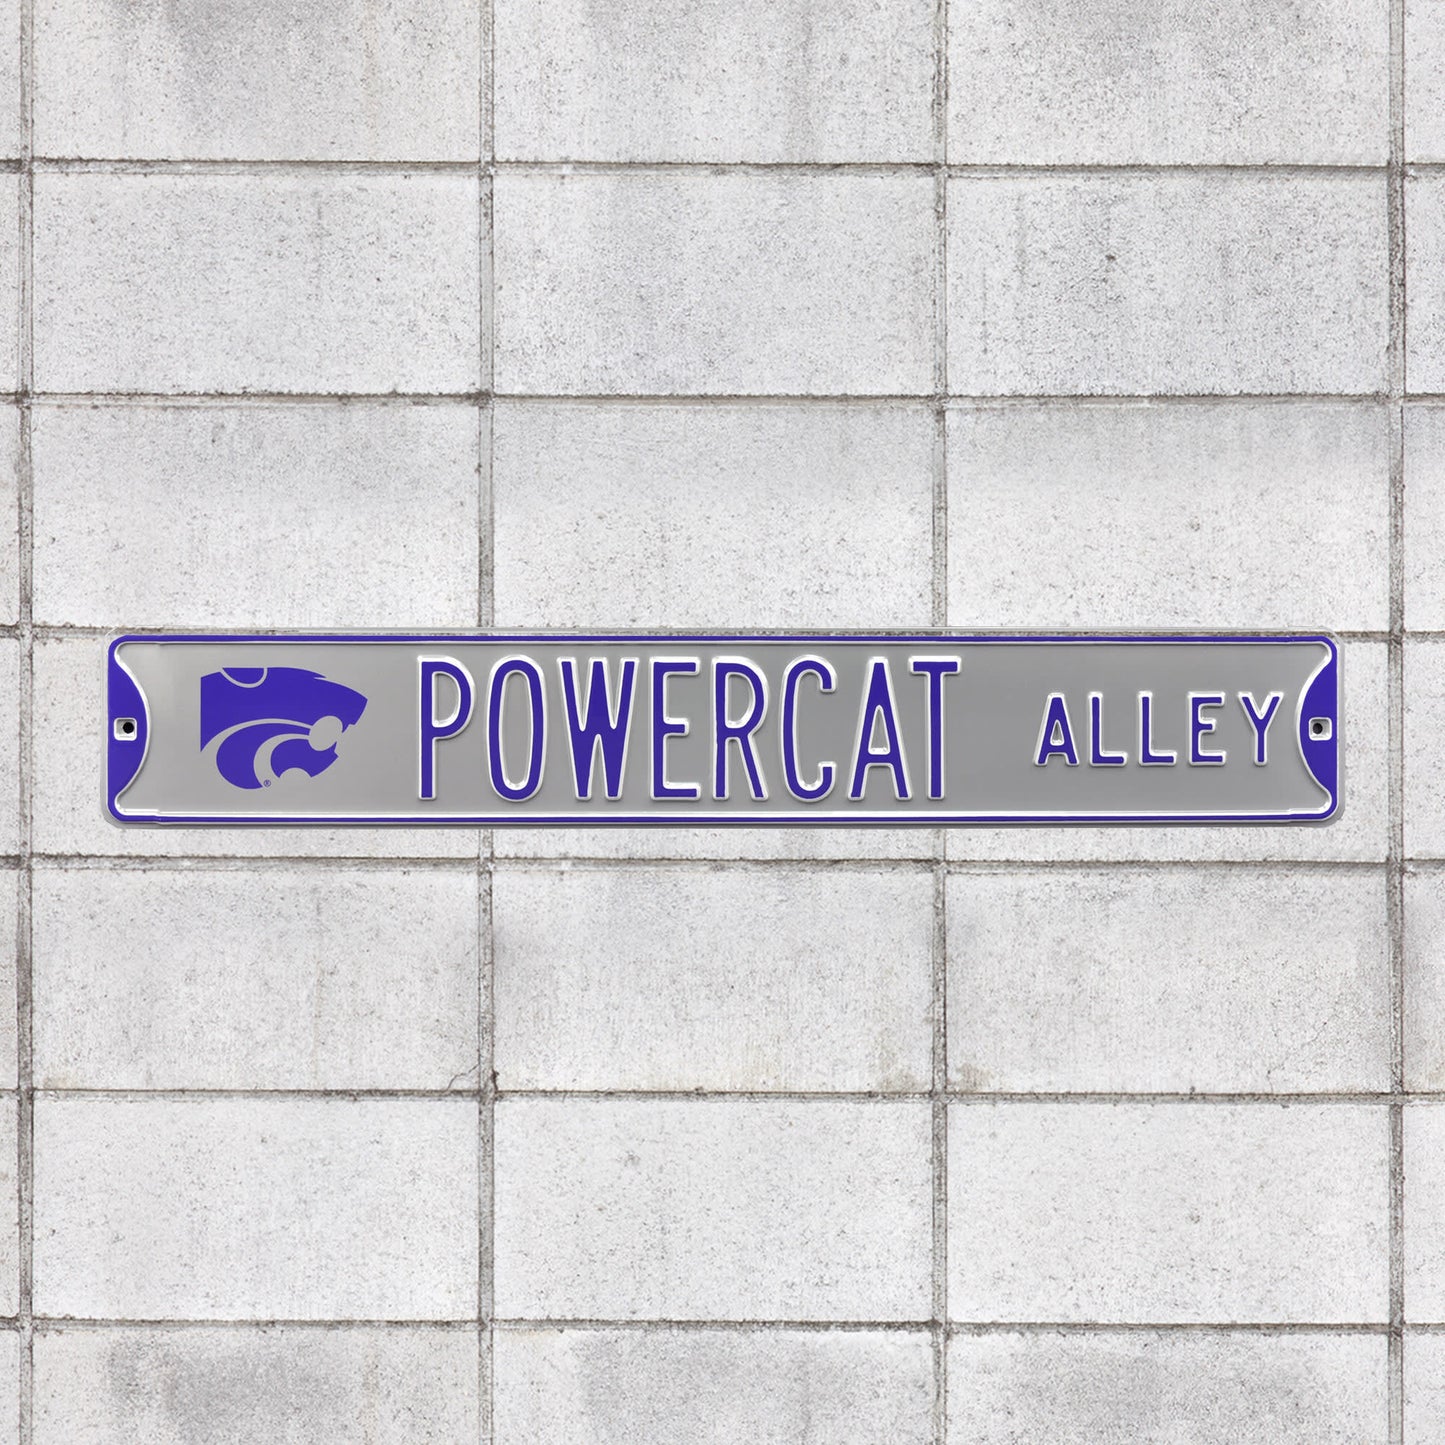 Kansas State Wildcats: Powercat Alley - Officially Licensed Metal Street Sign